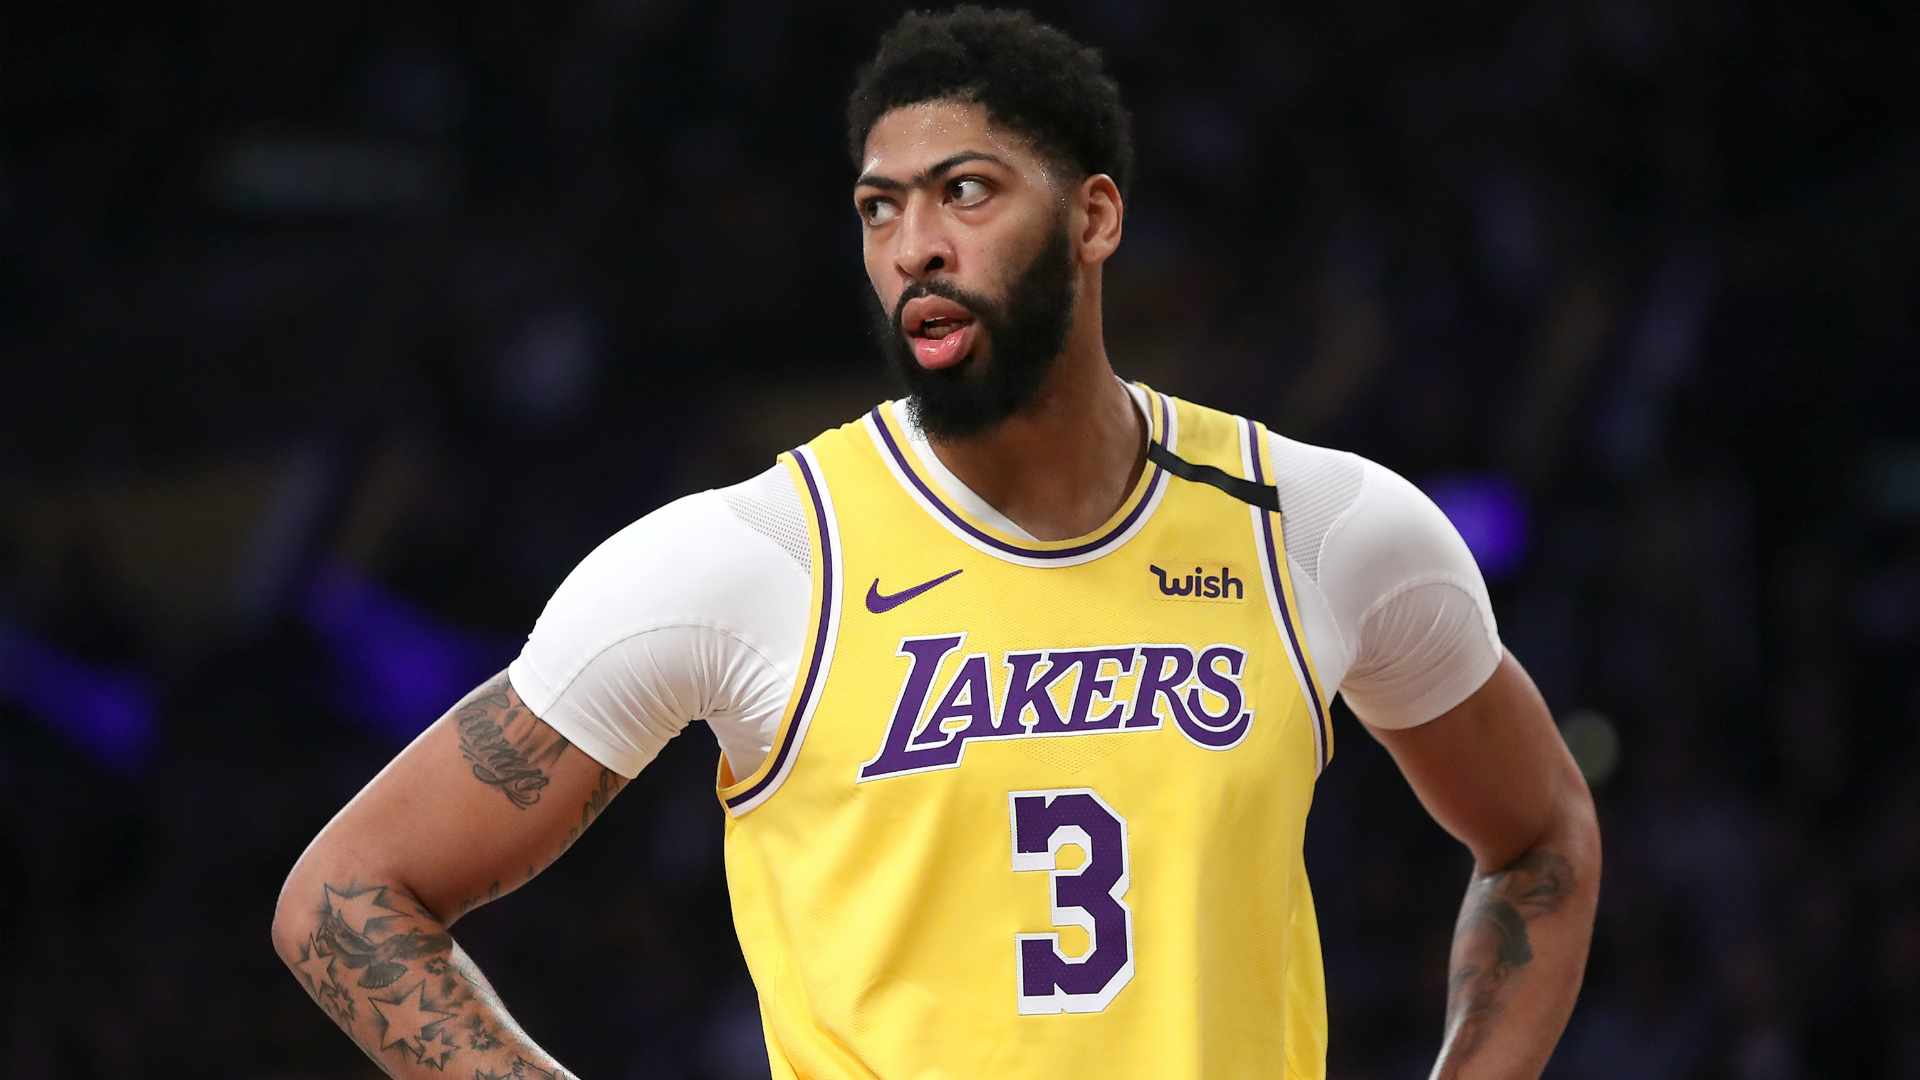 Like LeBron James, Los Angeles Lakers star Anthony Davis has decided against wearing a social justice message on his jersey.